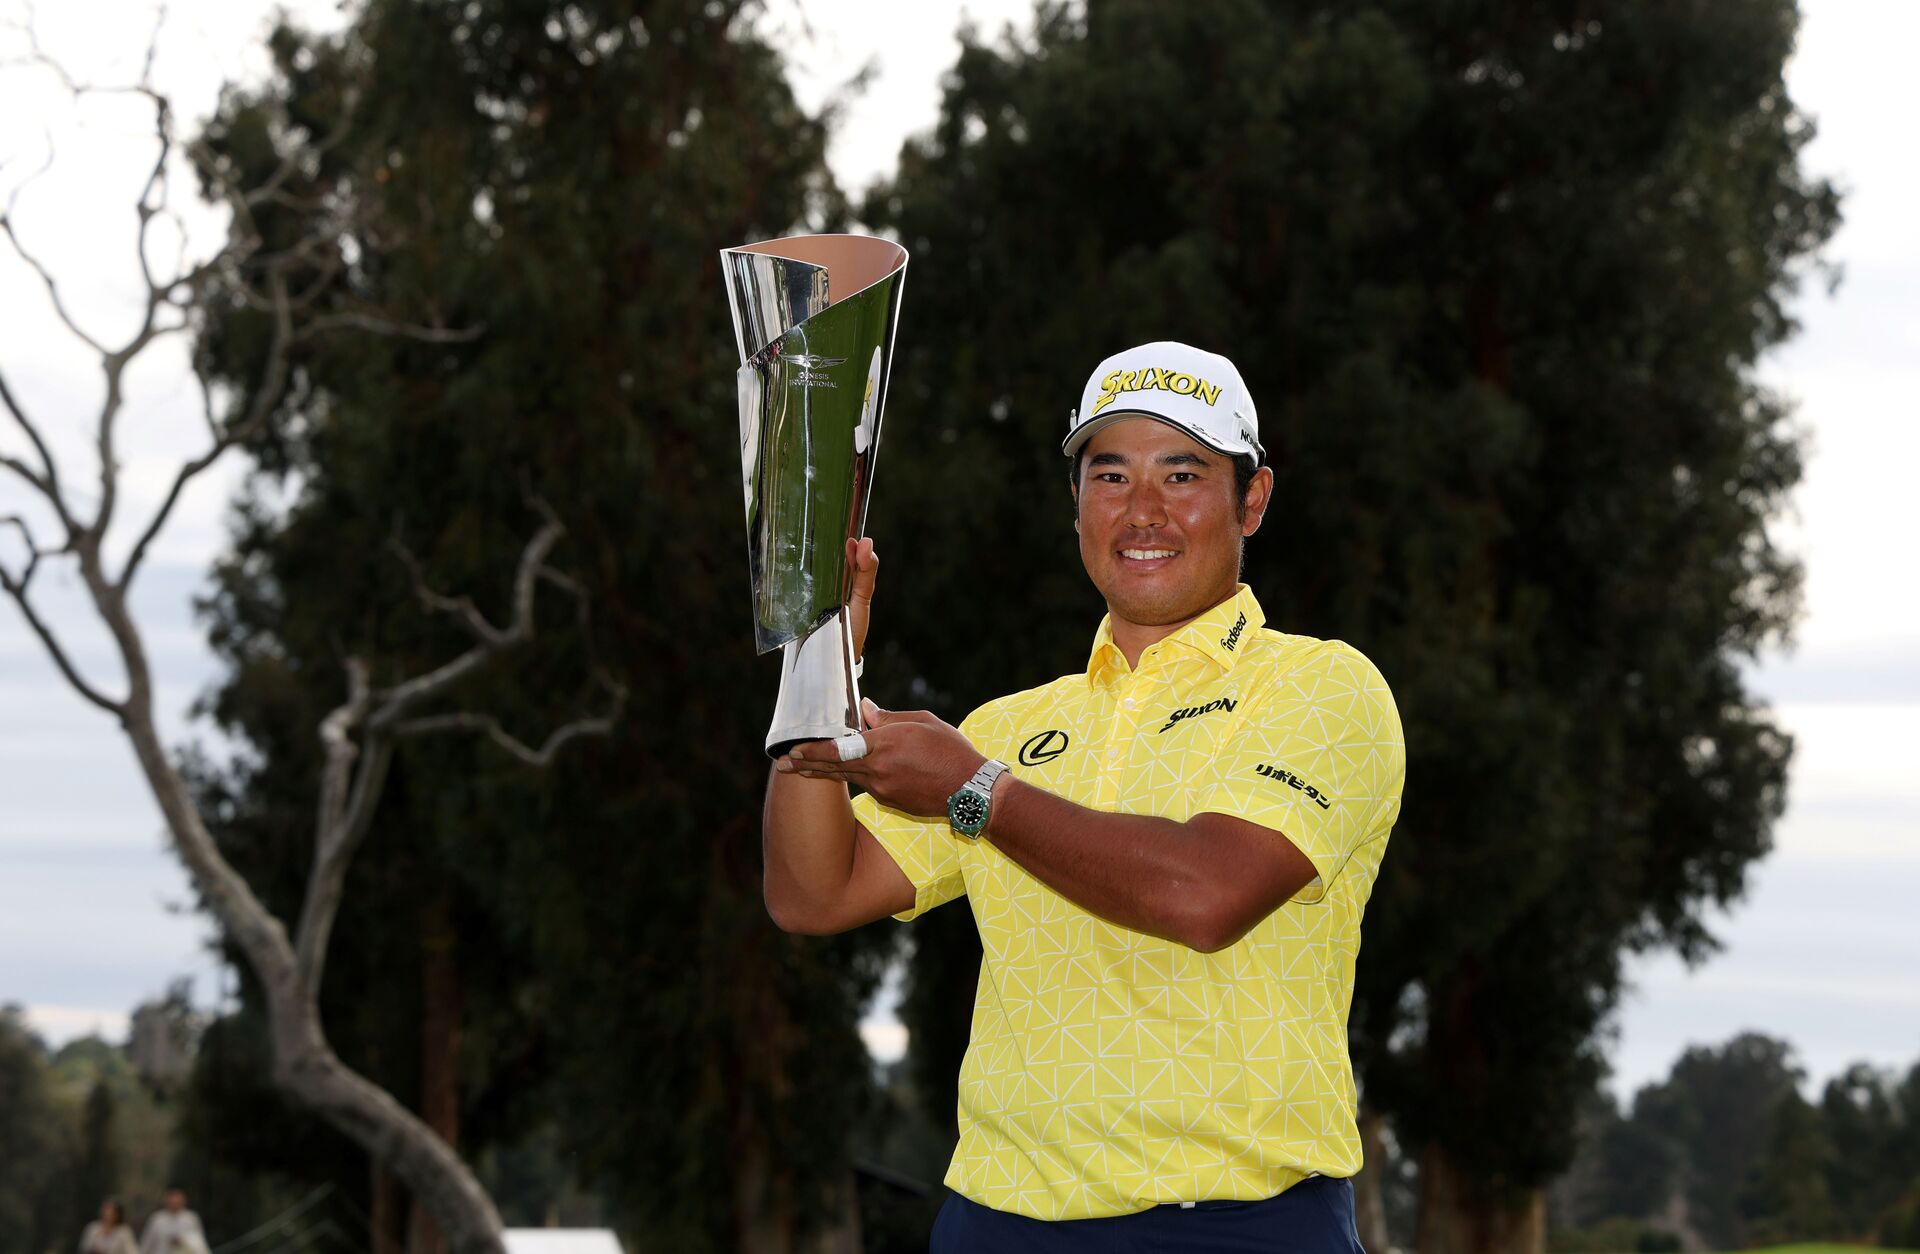 Matsuyama claims victory at The Genesis Invitational, becomes Asia’s most successful golfer on PGA Tour